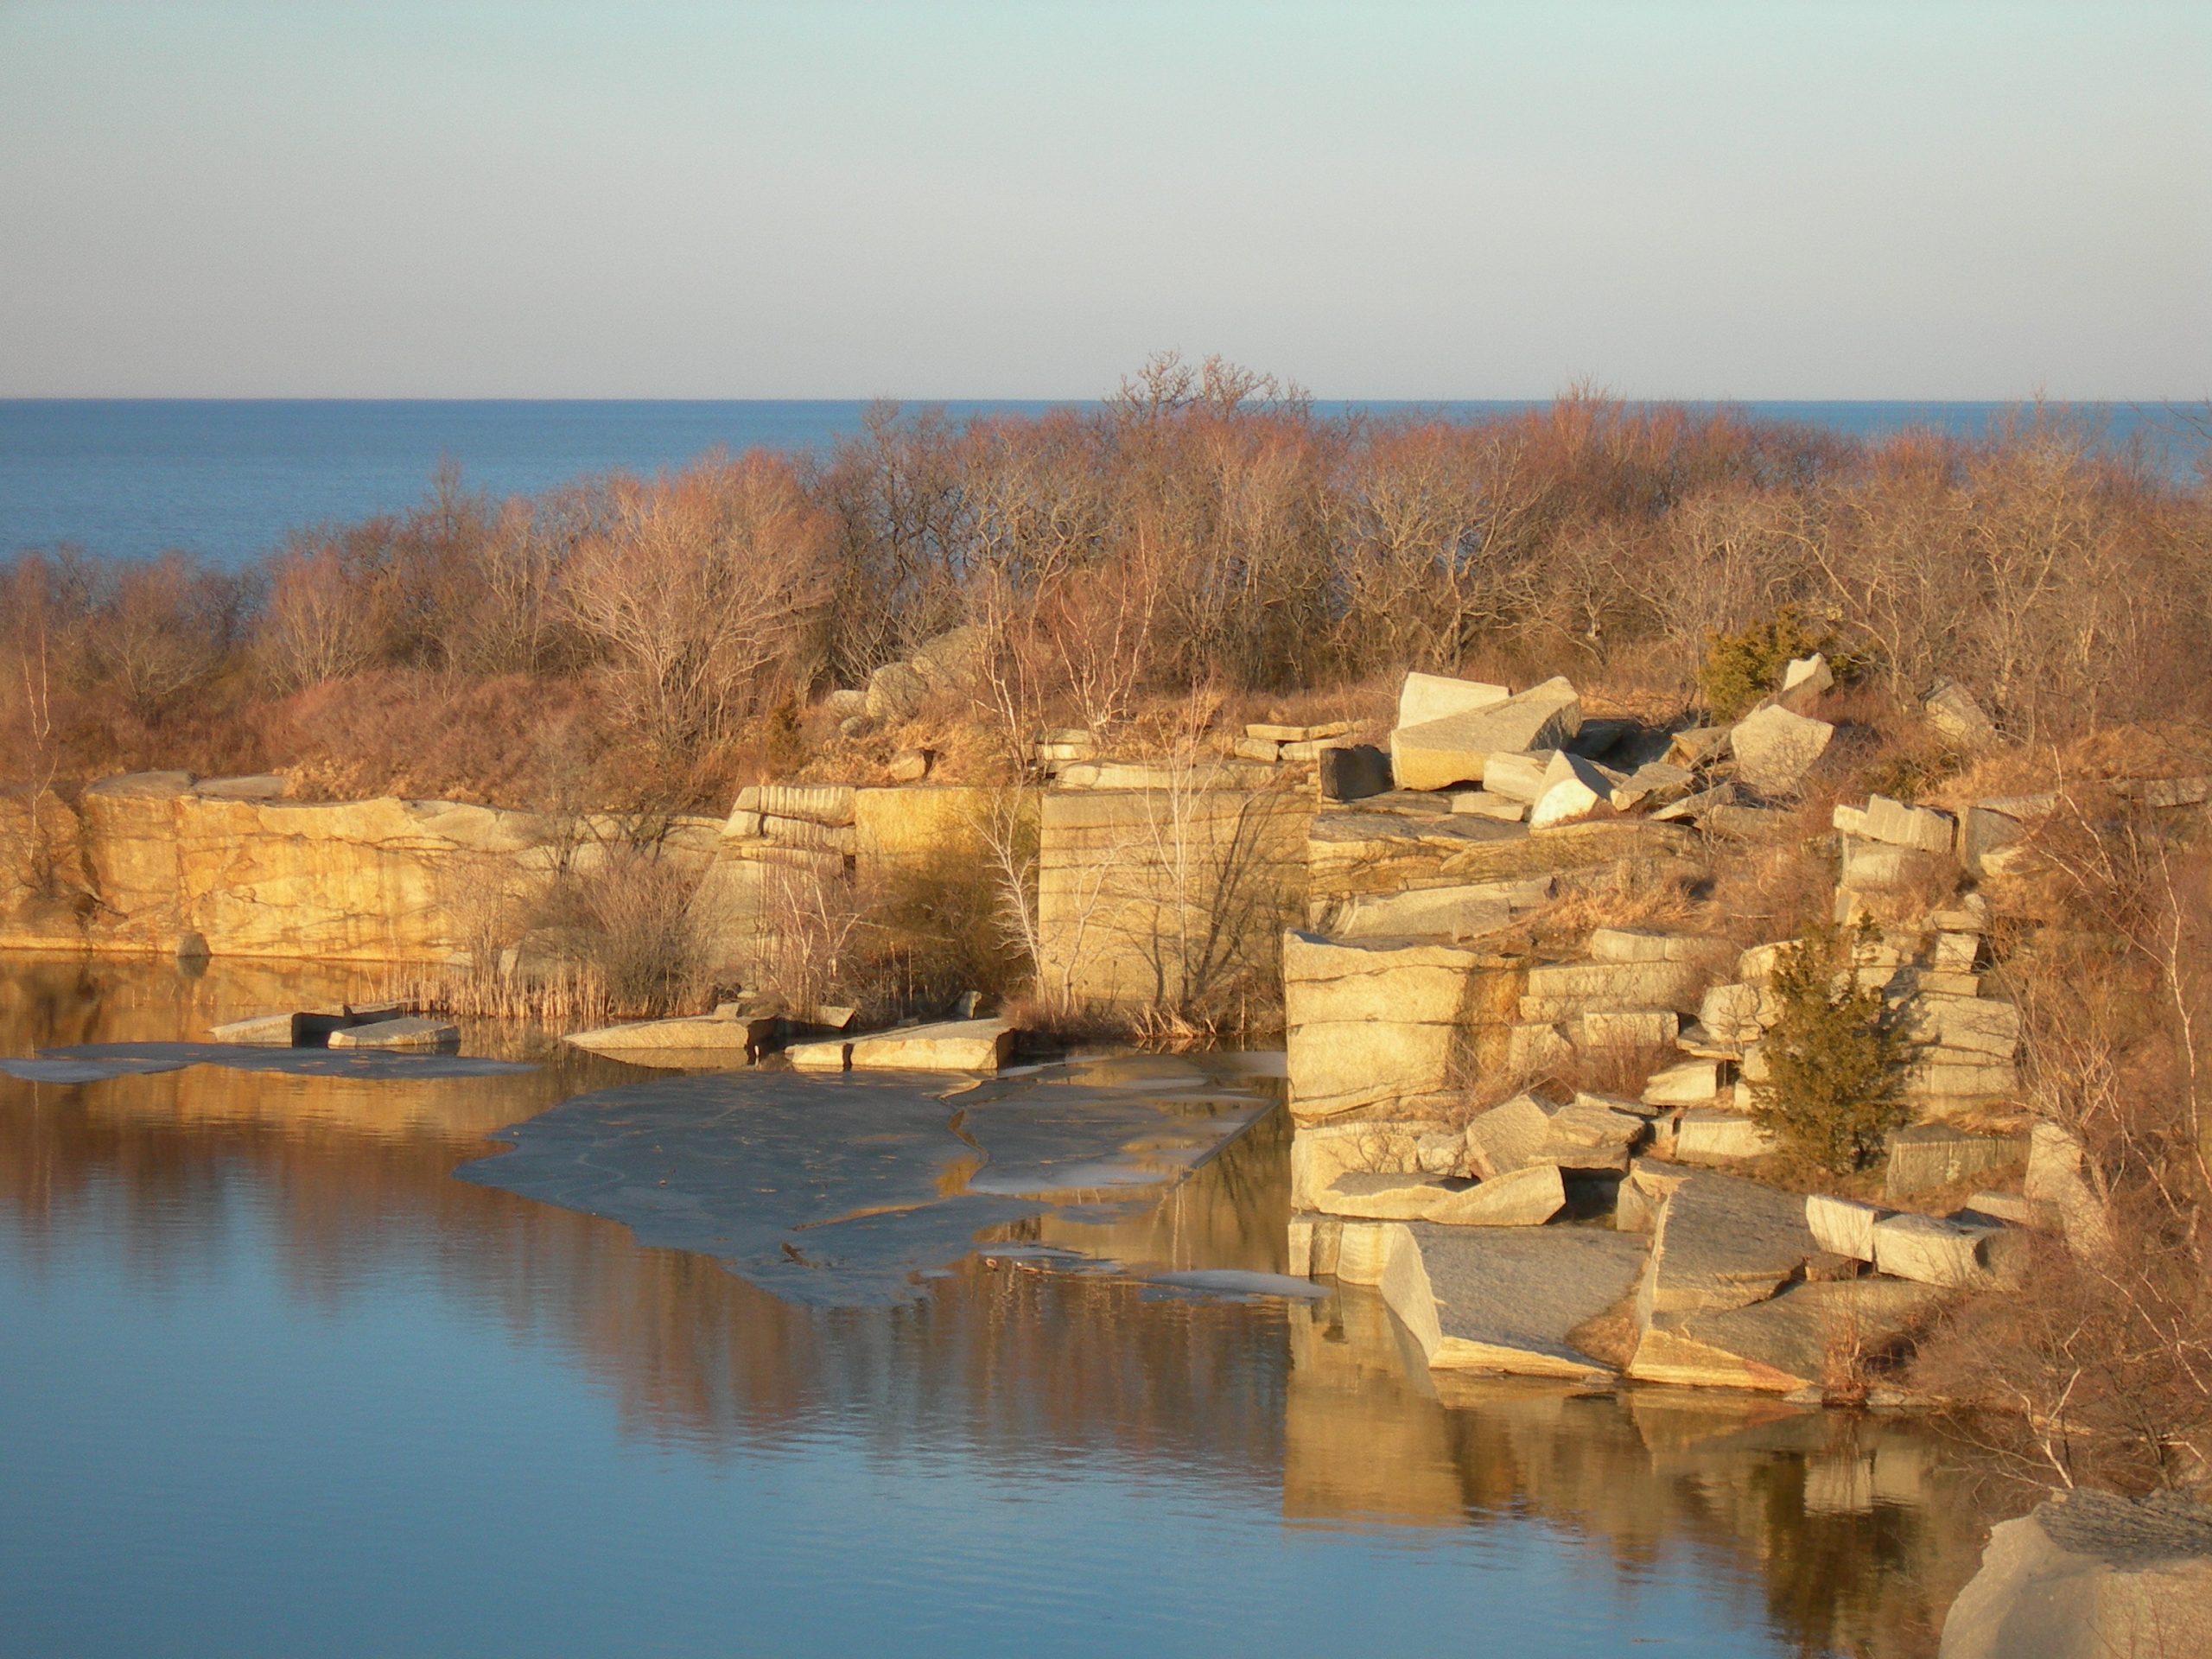 Quarry at Halibut Point (user submitted)